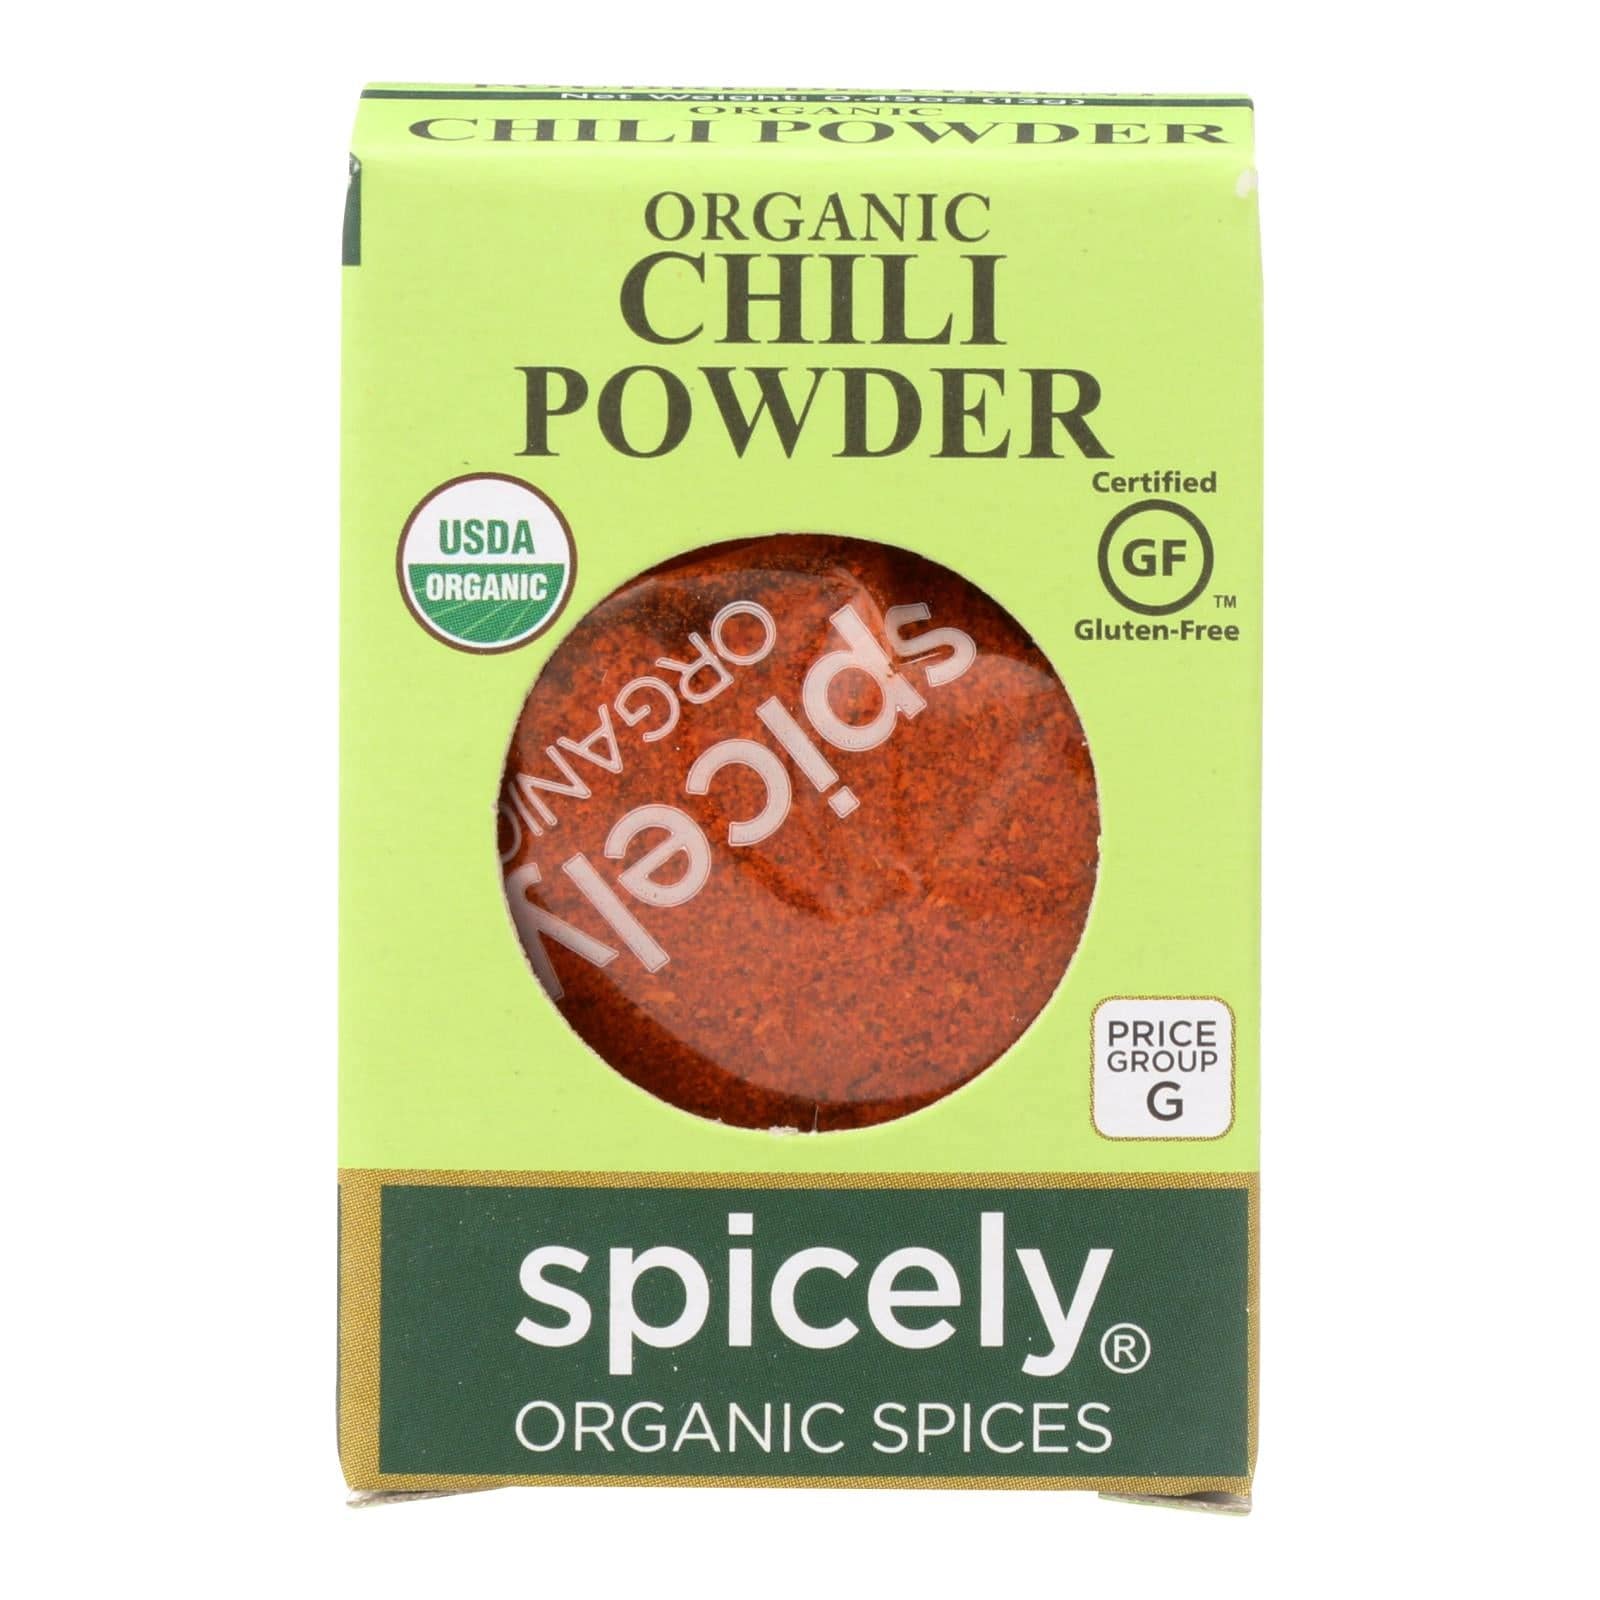 Spicely Organics - Organic Chili Powder - Case Of 6 - 0.45 Oz. | OnlyNaturals.us